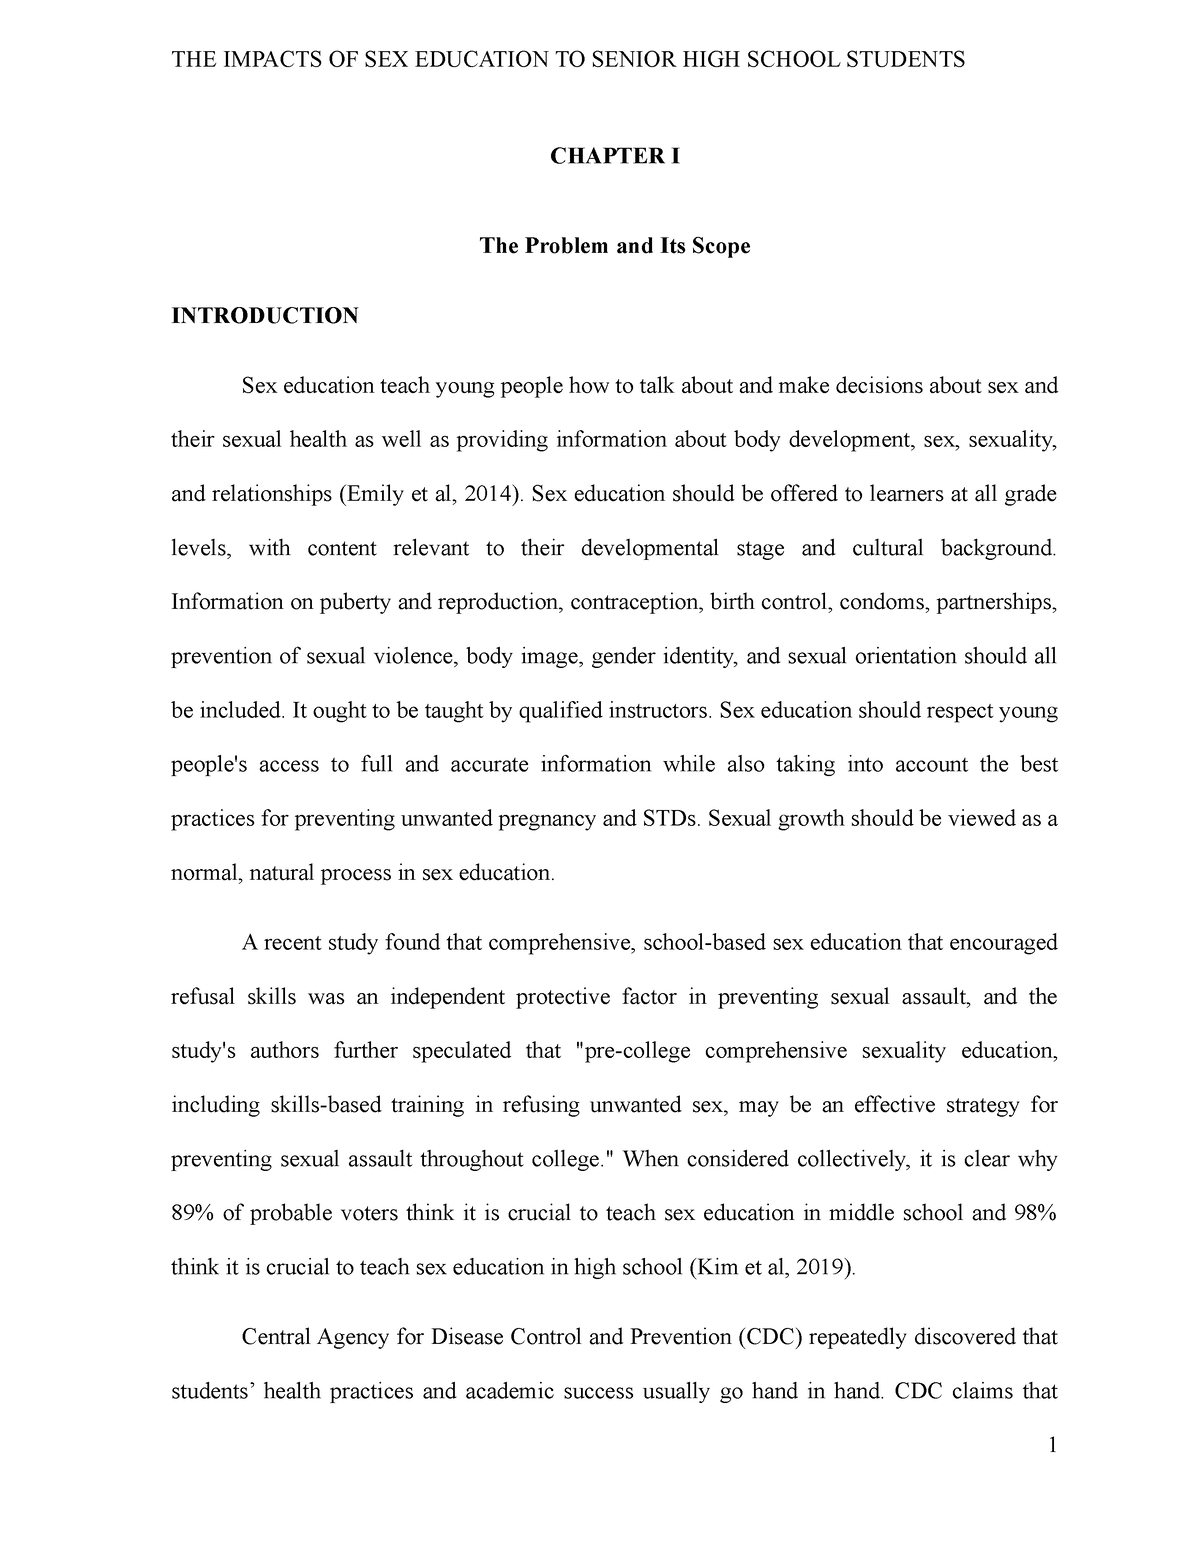 Practical Research 2 Final Output Chapter I The Problem And Its Scope Introduction Sex 4780